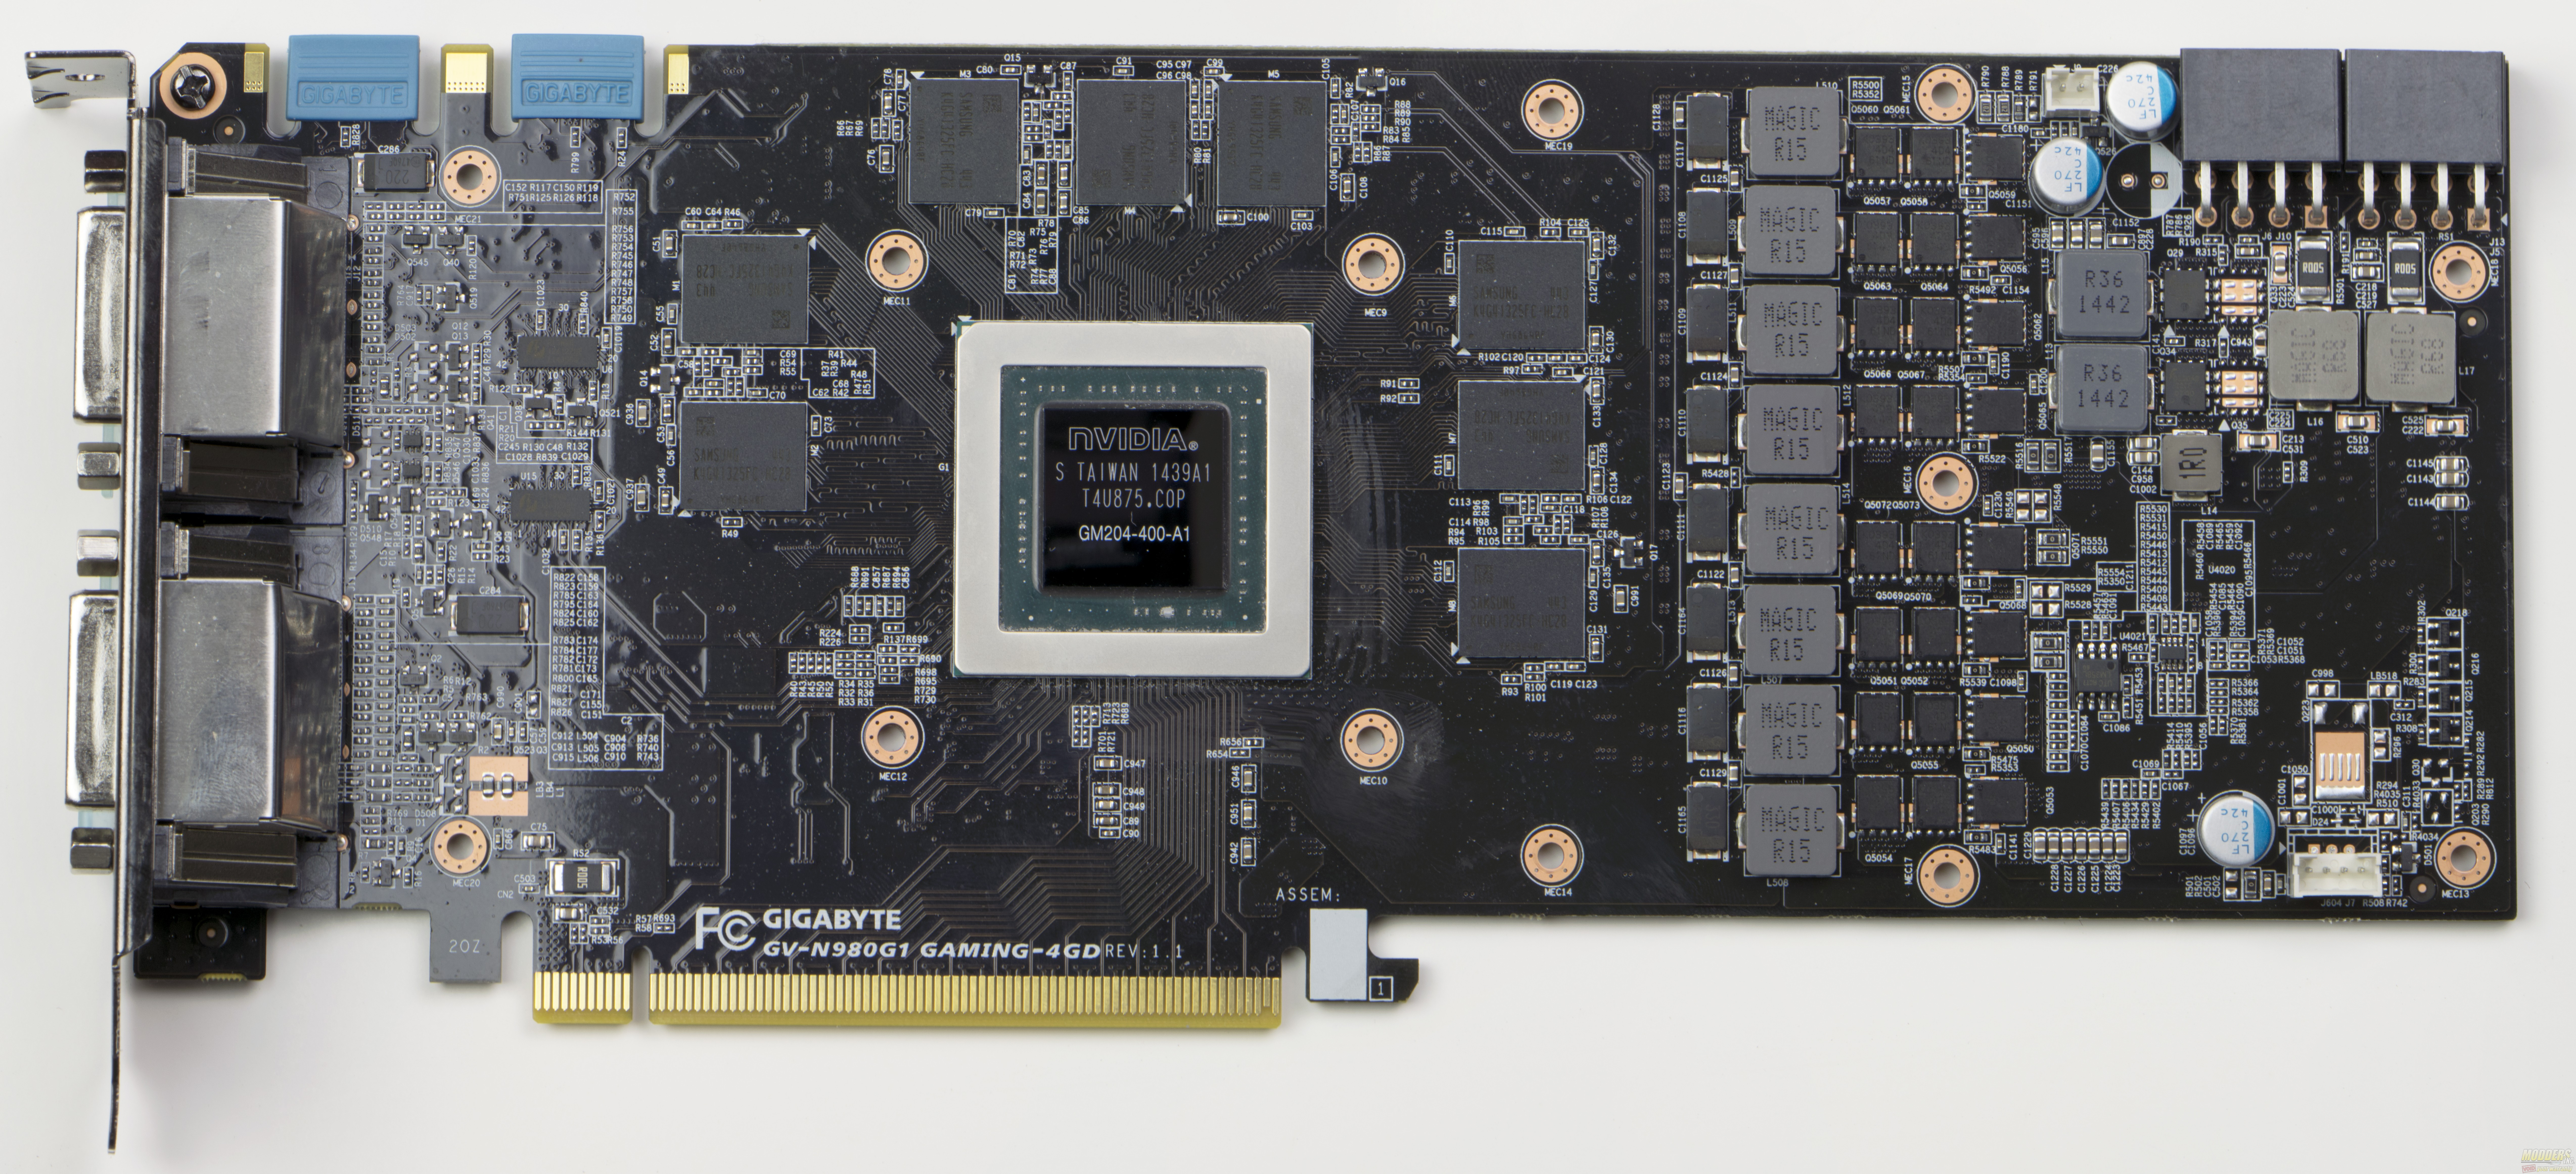 Gigabyte GTX 980 G1 Gaming 4GB Video Card Review - Page 3 Of 6